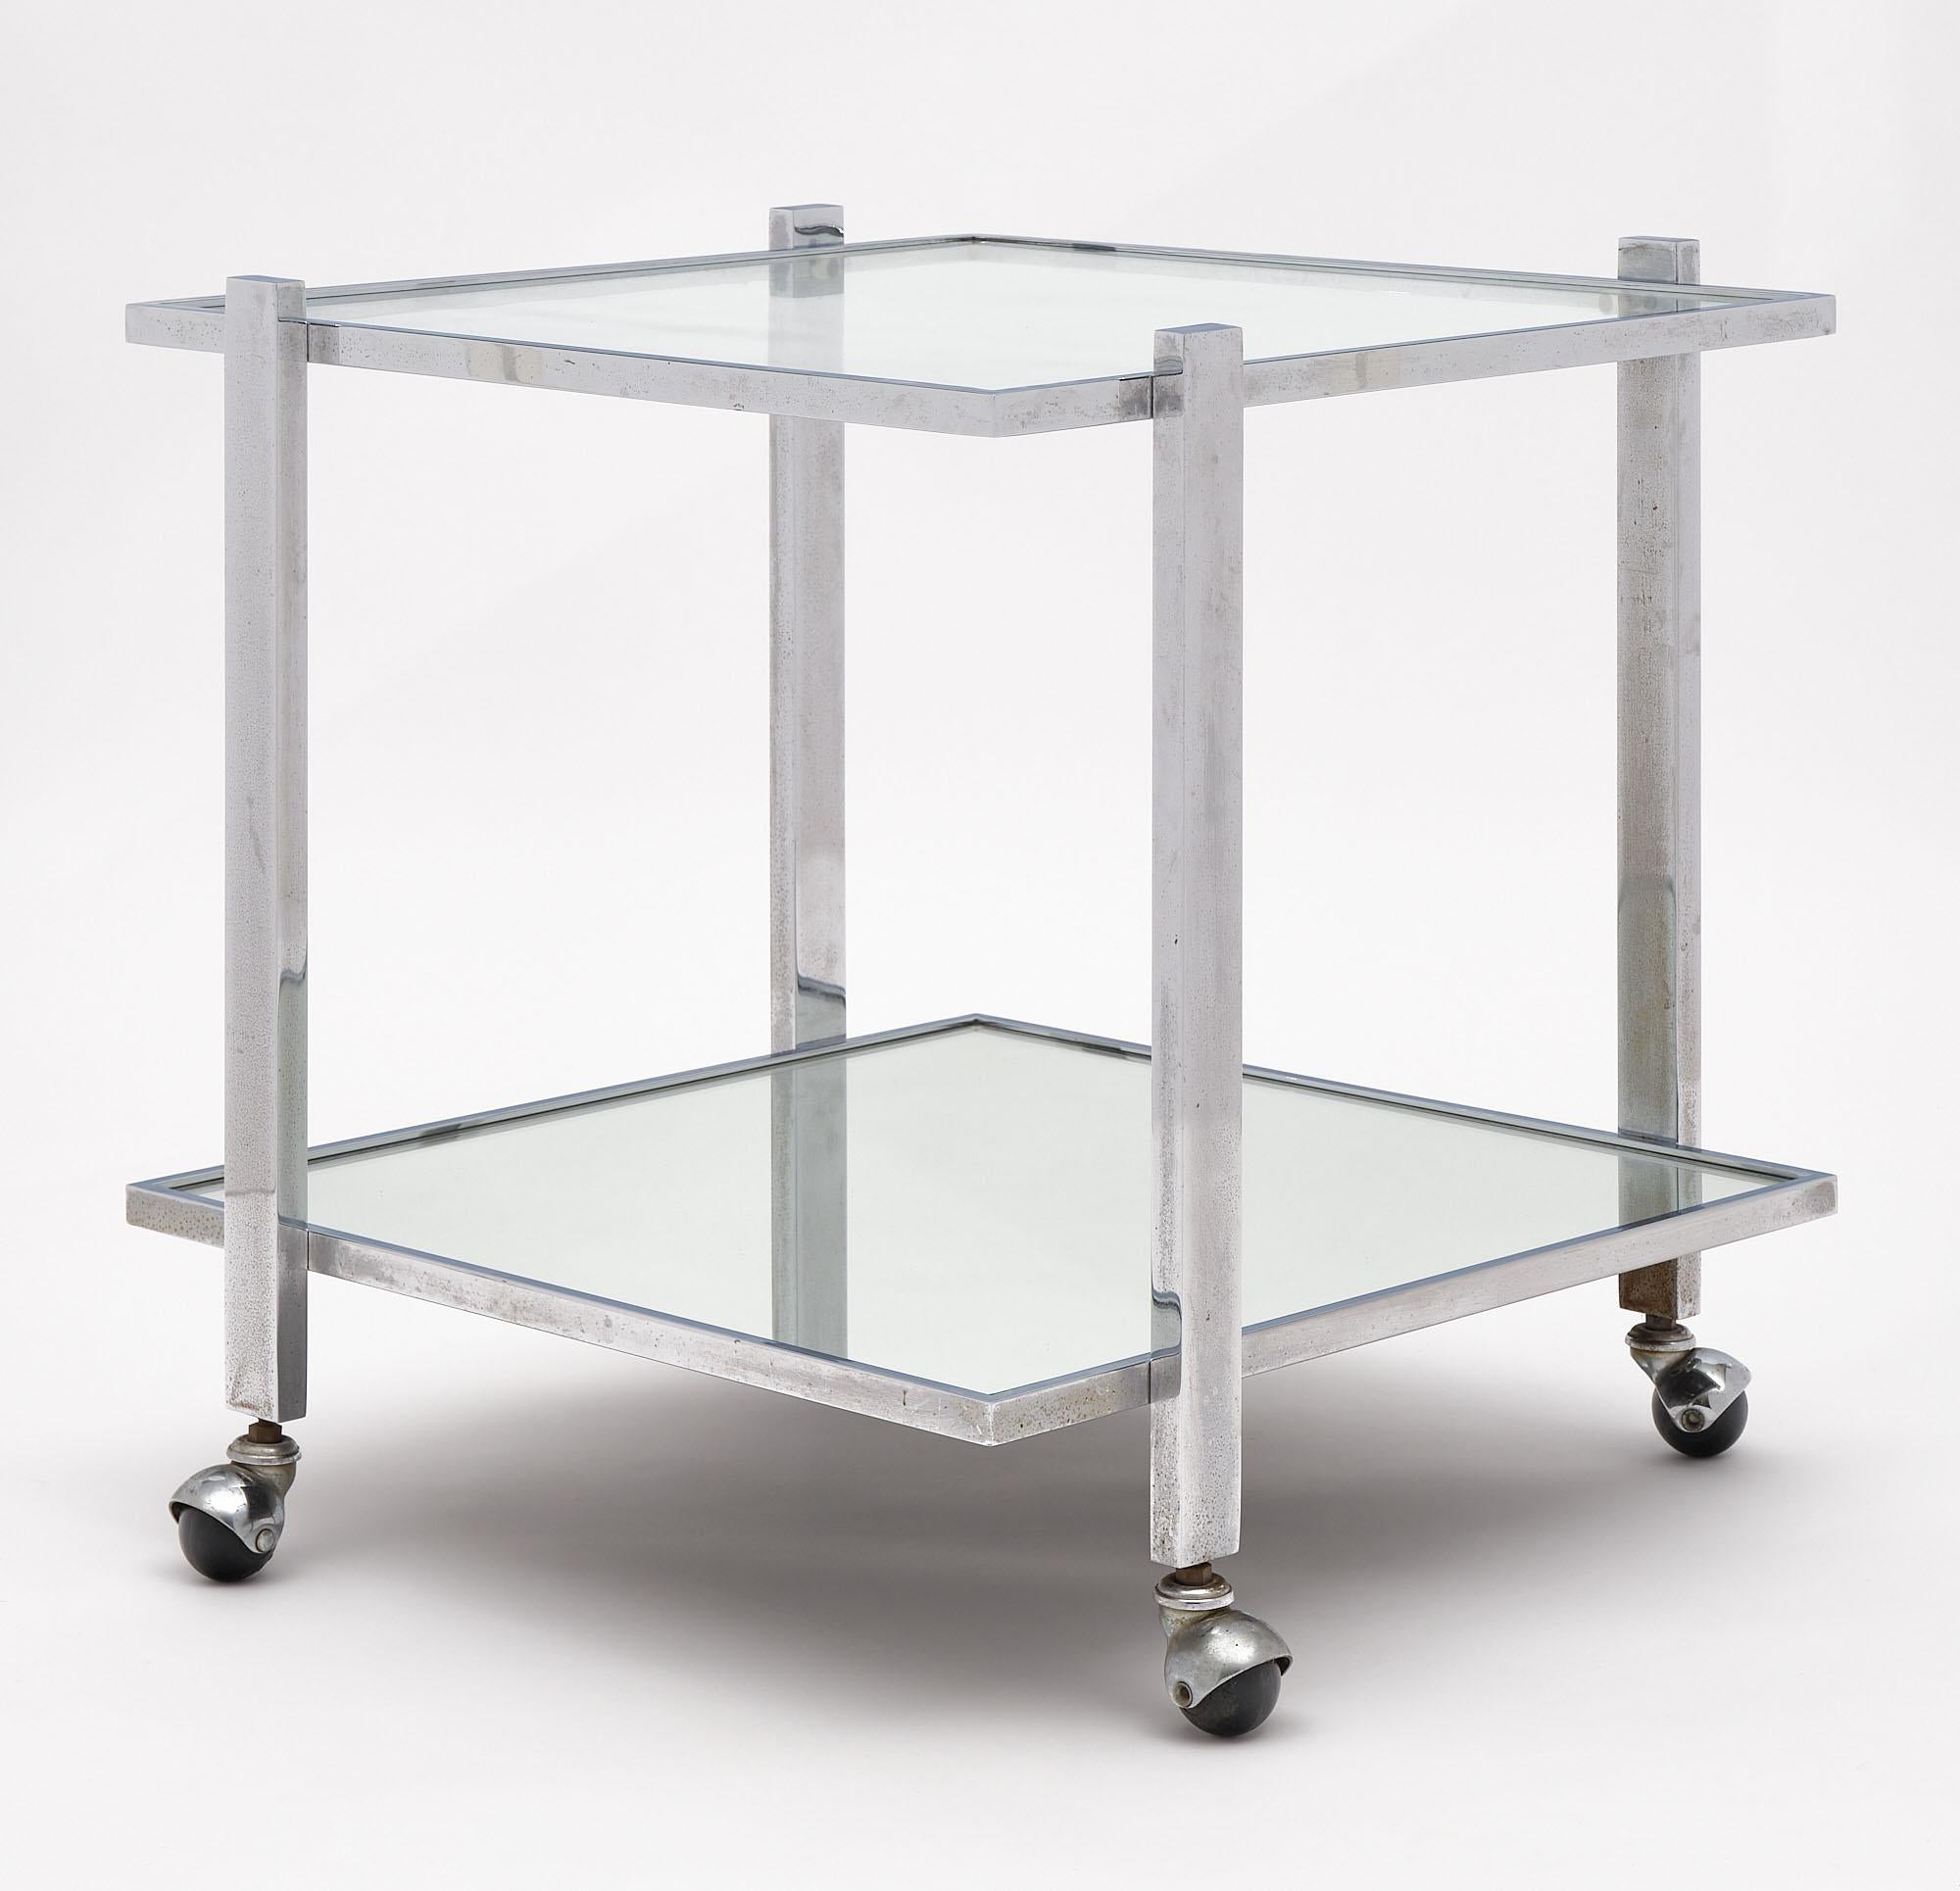 Side table from France made of chromed steel with a square sectioned structure with clear glass top shelf and mirrored bottom shelf. This piece is supported by casters. We love the modernist lines of this piece.